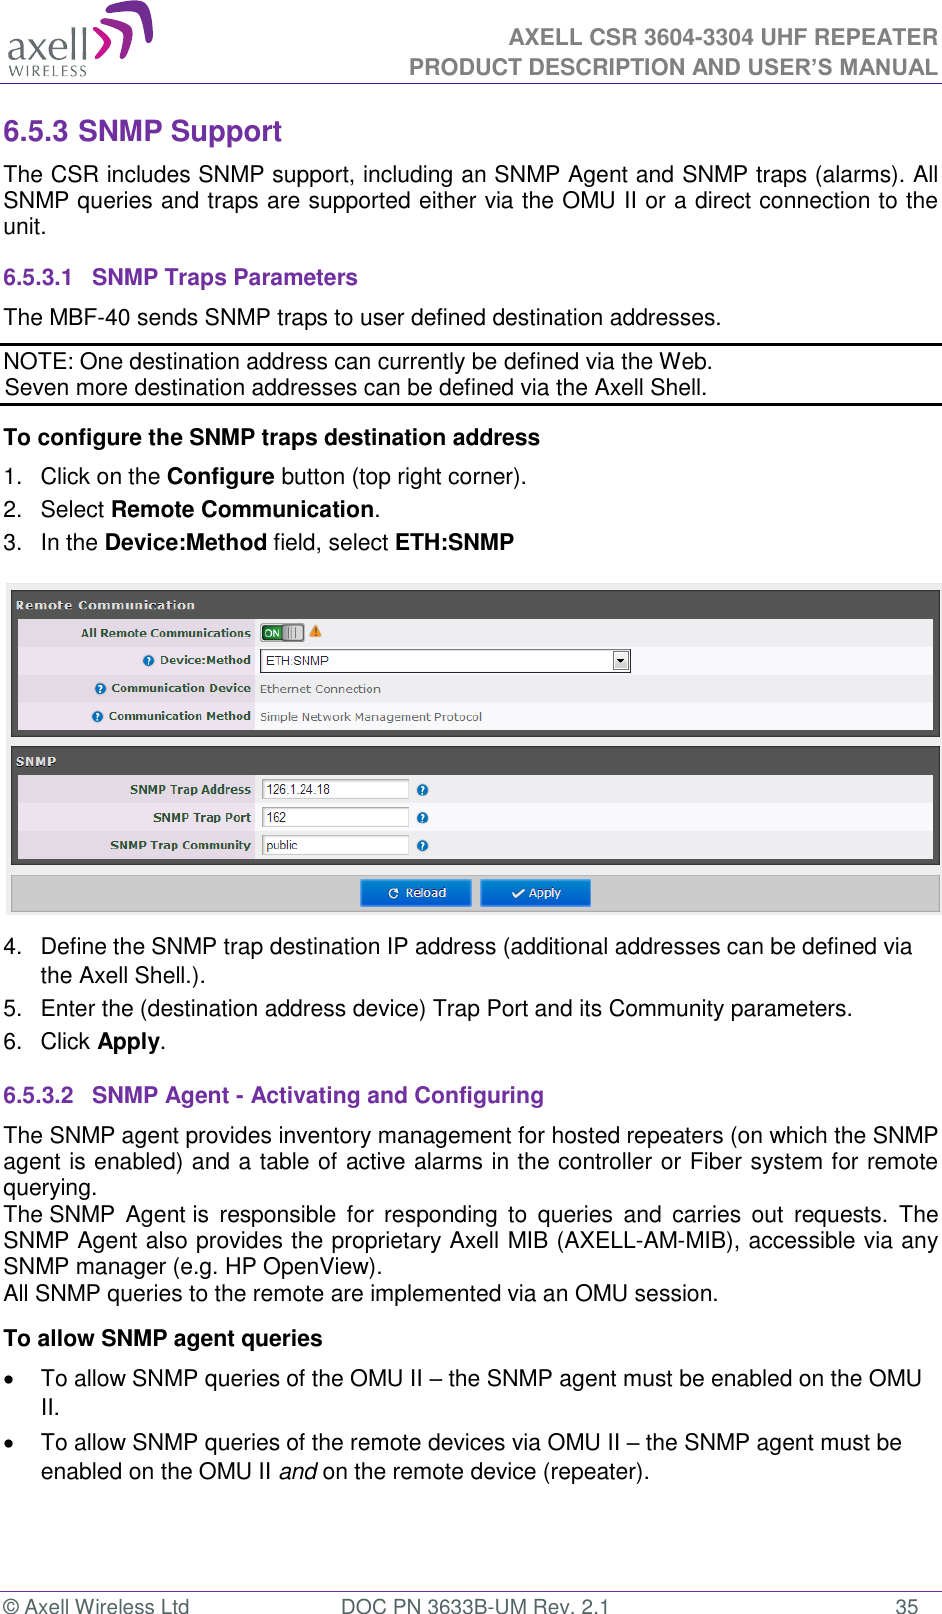  AXELL CSR 3604-3304 UHF REPEATER PRODUCT DESCRIPTION AND USER’S MANUAL  © Axell Wireless Ltd  DOC PN 3633B-UM Rev. 2.1  35 6.5.3 SNMP Support The CSR includes SNMP support, including an SNMP Agent and SNMP traps (alarms). All SNMP queries and traps are supported either via the OMU II or a direct connection to the unit. 6.5.3.1  SNMP Traps Parameters The MBF-40 sends SNMP traps to user defined destination addresses. NOTE: One destination address can currently be defined via the Web.  Seven more destination addresses can be defined via the Axell Shell. To configure the SNMP traps destination address 1.  Click on the Configure button (top right corner). 2.  Select Remote Communication. 3.  In the Device:Method field, select ETH:SNMP  4.  Define the SNMP trap destination IP address (additional addresses can be defined via the Axell Shell.). 5.  Enter the (destination address device) Trap Port and its Community parameters. 6.  Click Apply. 6.5.3.2  SNMP Agent - Activating and Configuring The SNMP agent provides inventory management for hosted repeaters (on which the SNMP agent is enabled) and a table of active alarms in the controller or Fiber system for remote querying. The SNMP  Agent is  responsible  for  responding  to  queries  and  carries  out  requests.  The SNMP Agent also provides the proprietary Axell MIB (AXELL-AM-MIB), accessible via any SNMP manager (e.g. HP OpenView).  All SNMP queries to the remote are implemented via an OMU session.  To allow SNMP agent queries   To allow SNMP queries of the OMU II – the SNMP agent must be enabled on the OMU II.  To allow SNMP queries of the remote devices via OMU II – the SNMP agent must be enabled on the OMU II and on the remote device (repeater).   